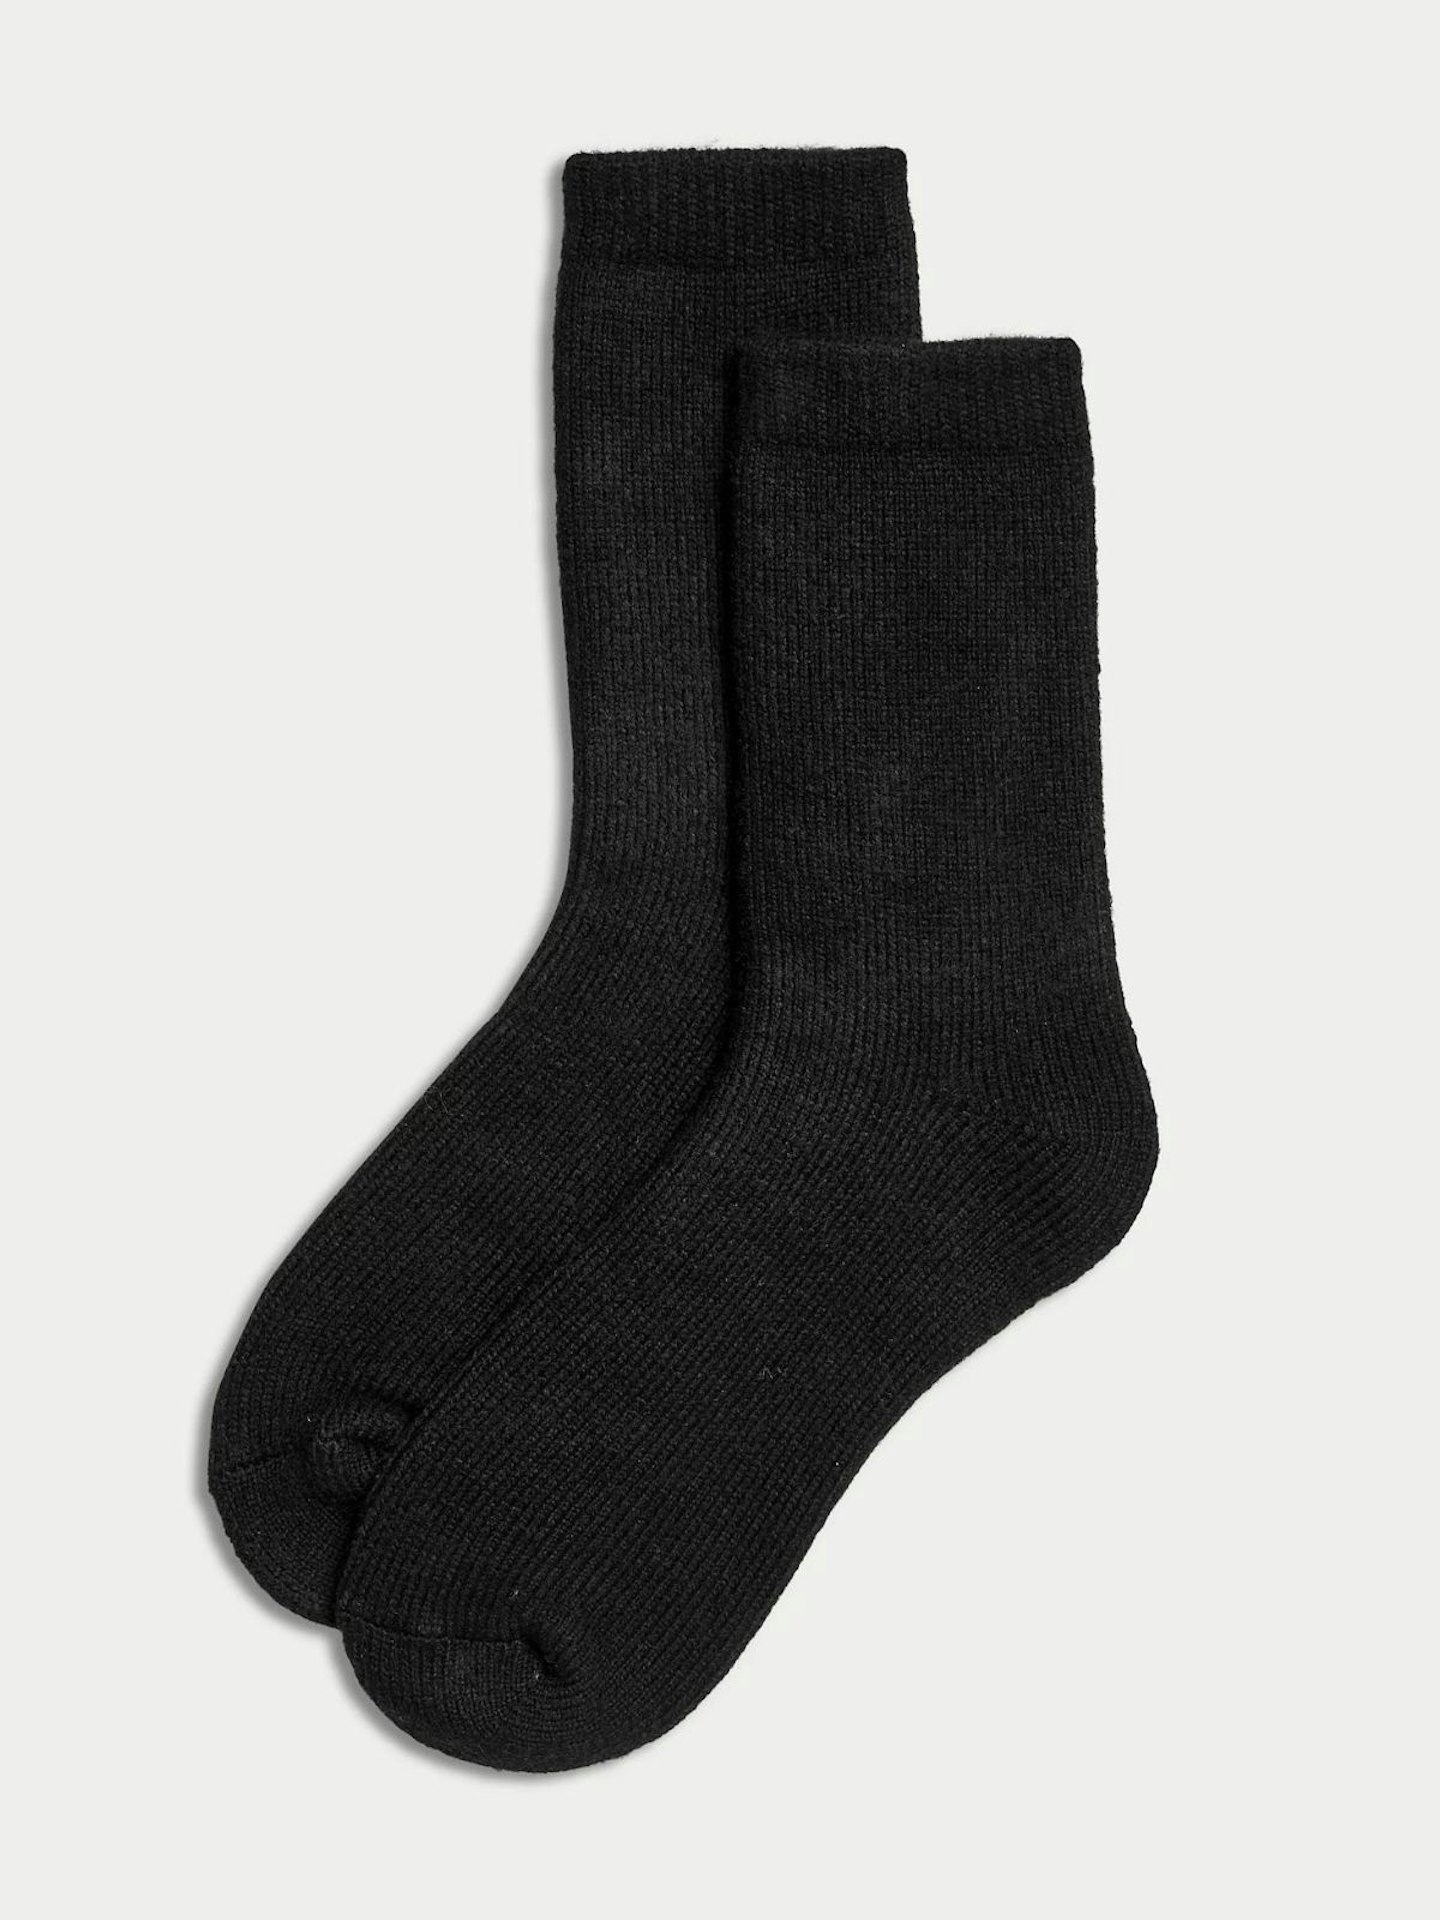 M&S Two Pack Heavyweight Thermal Boot Socks